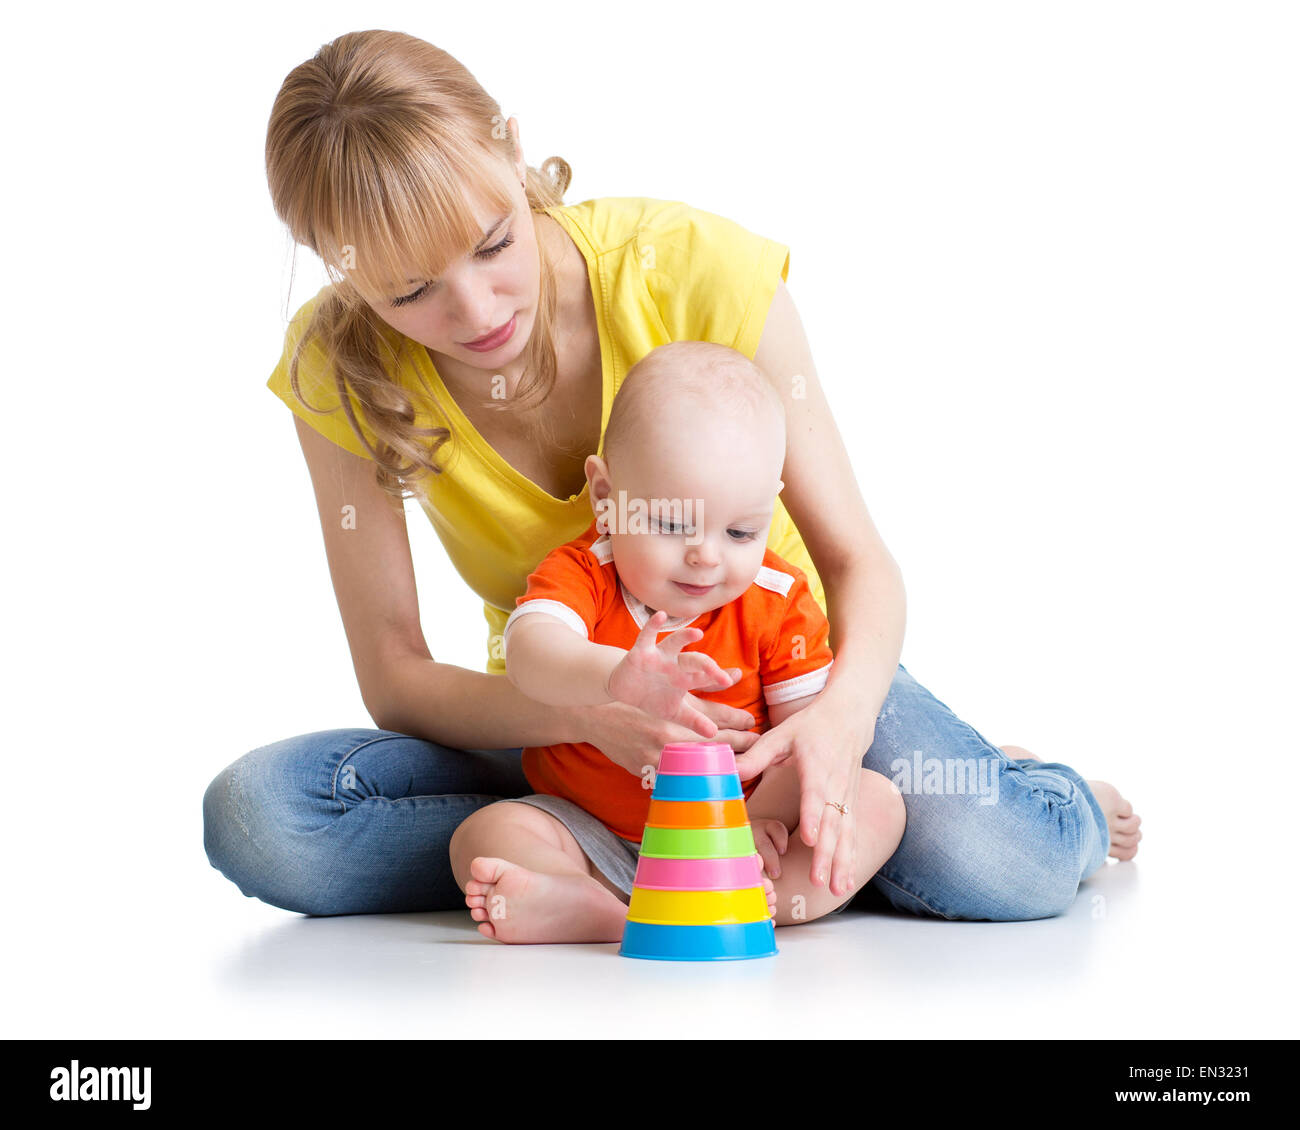 baby boy and his mother play together Stock Photo